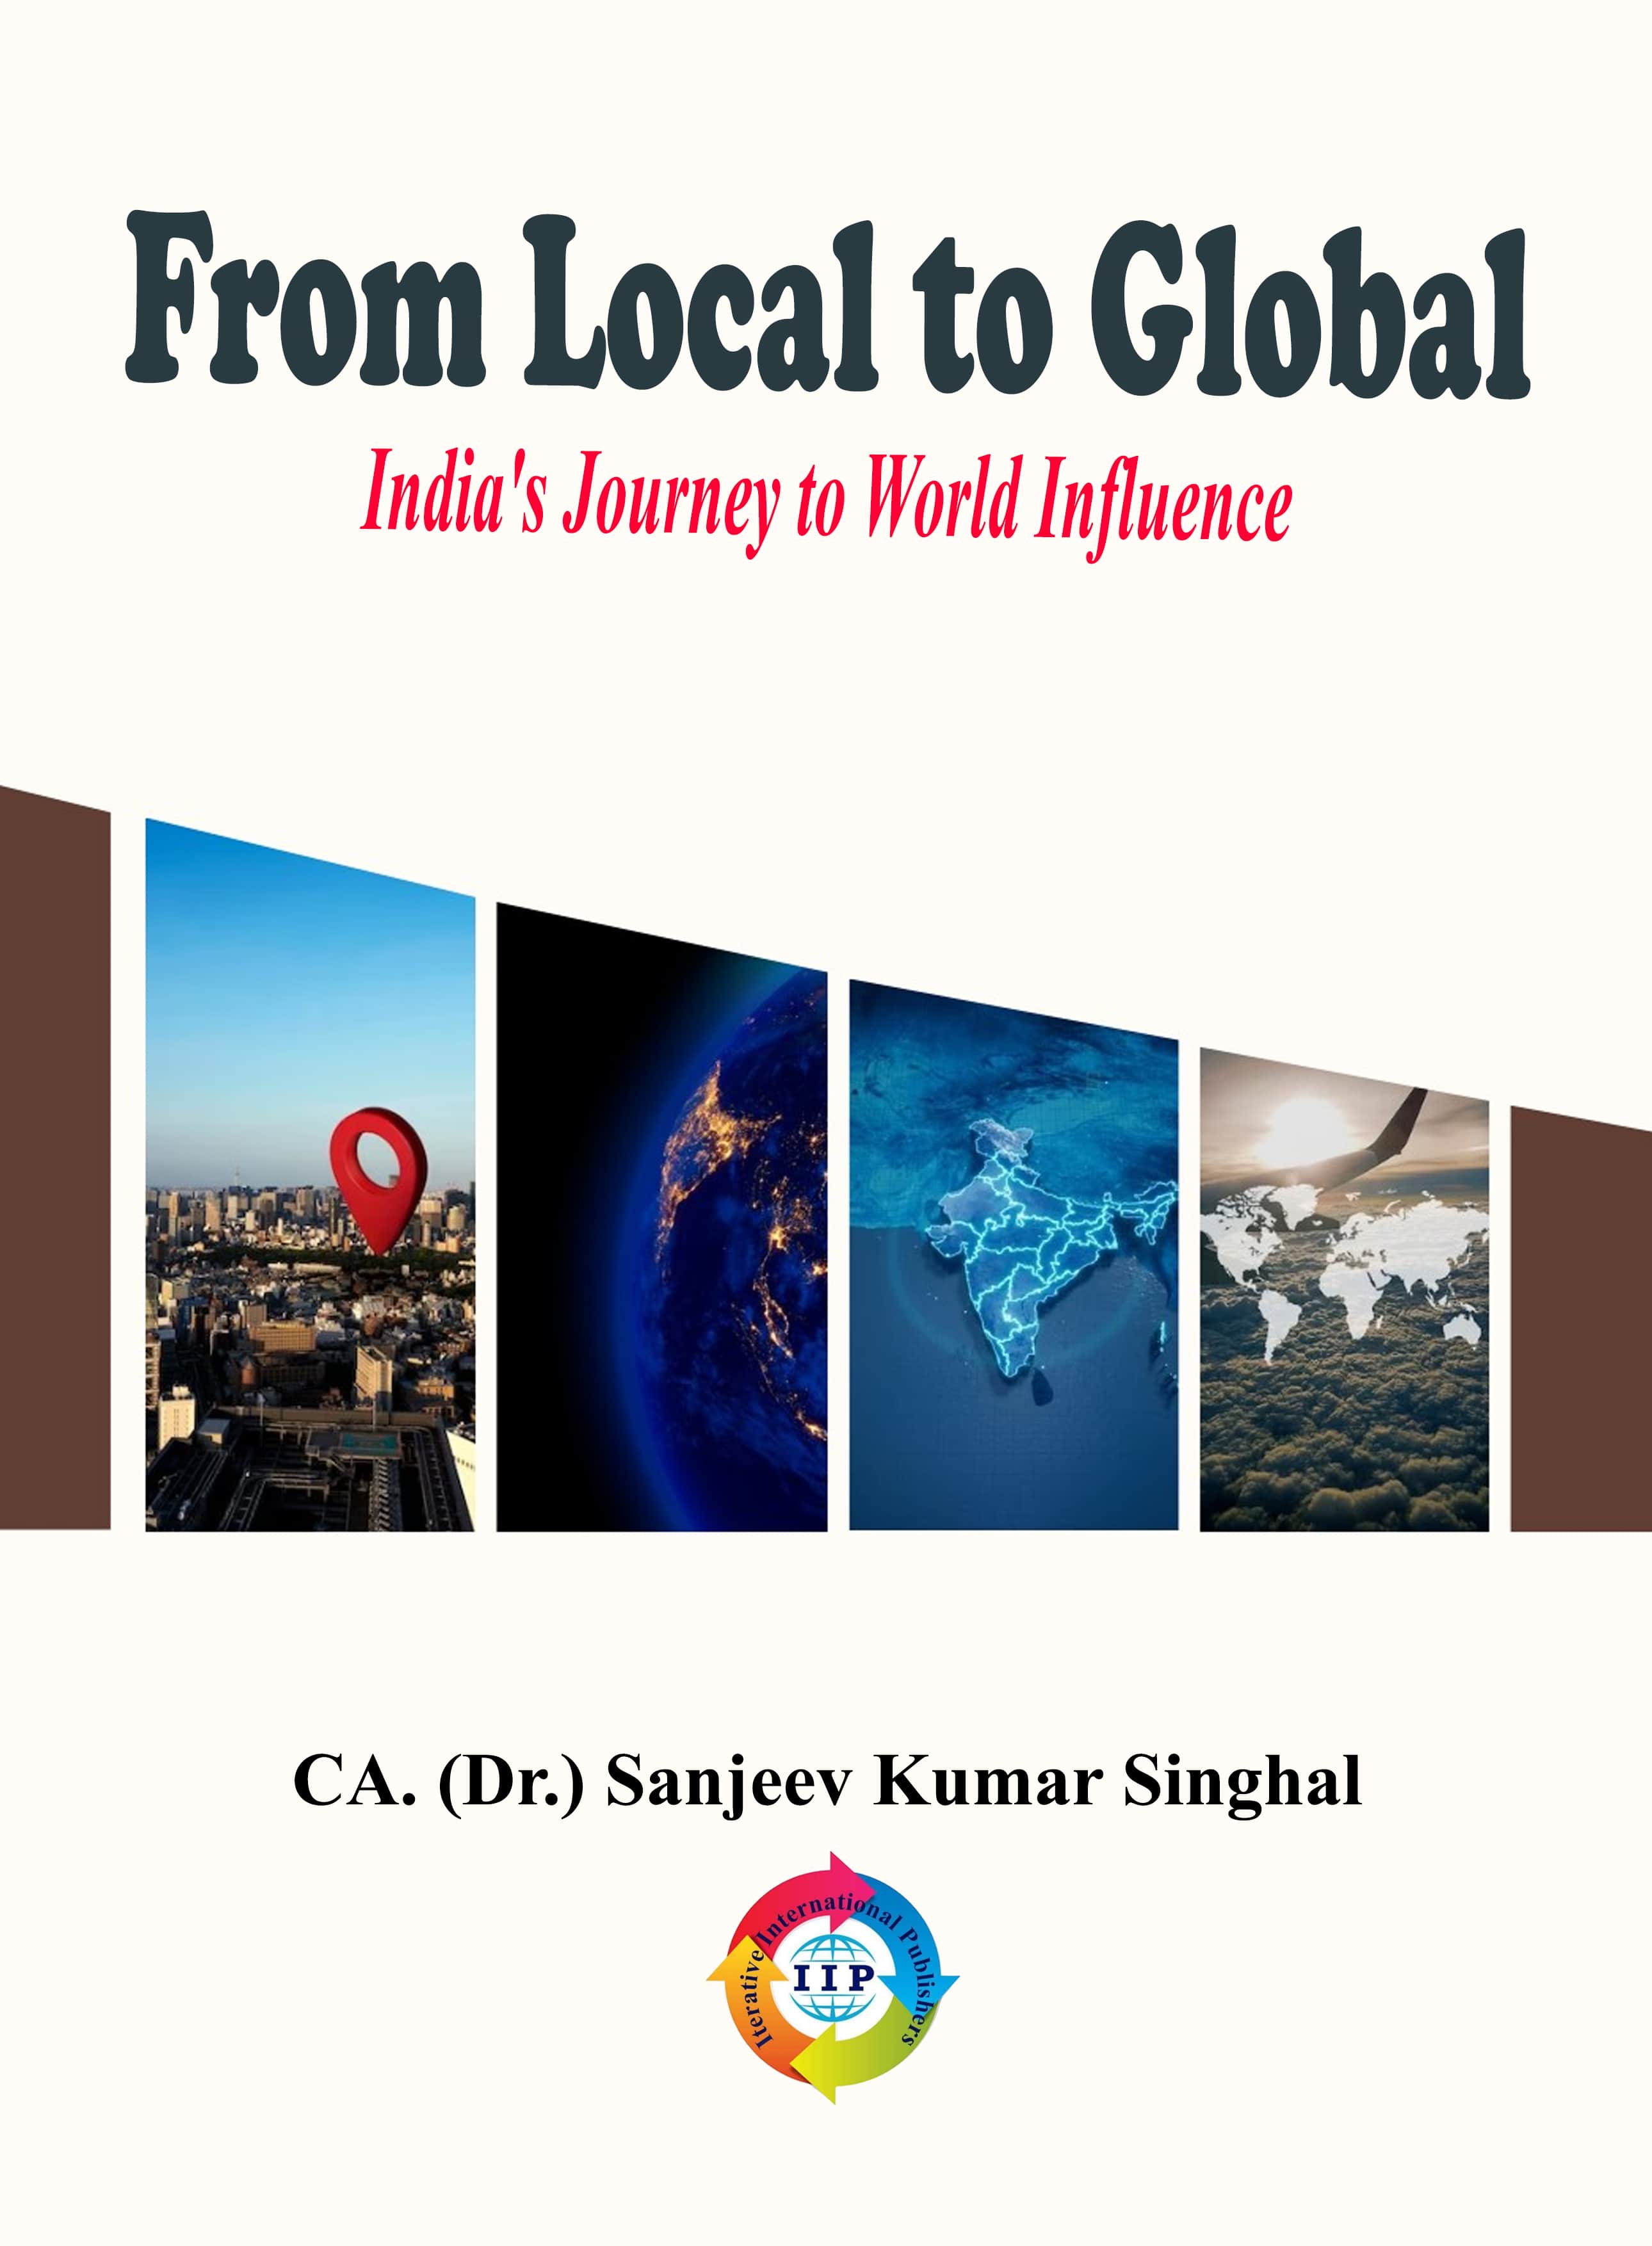 FROM LOCAL TO GLOBAL: INDIA'S JOURNEY TO WORLD INFLUENCE